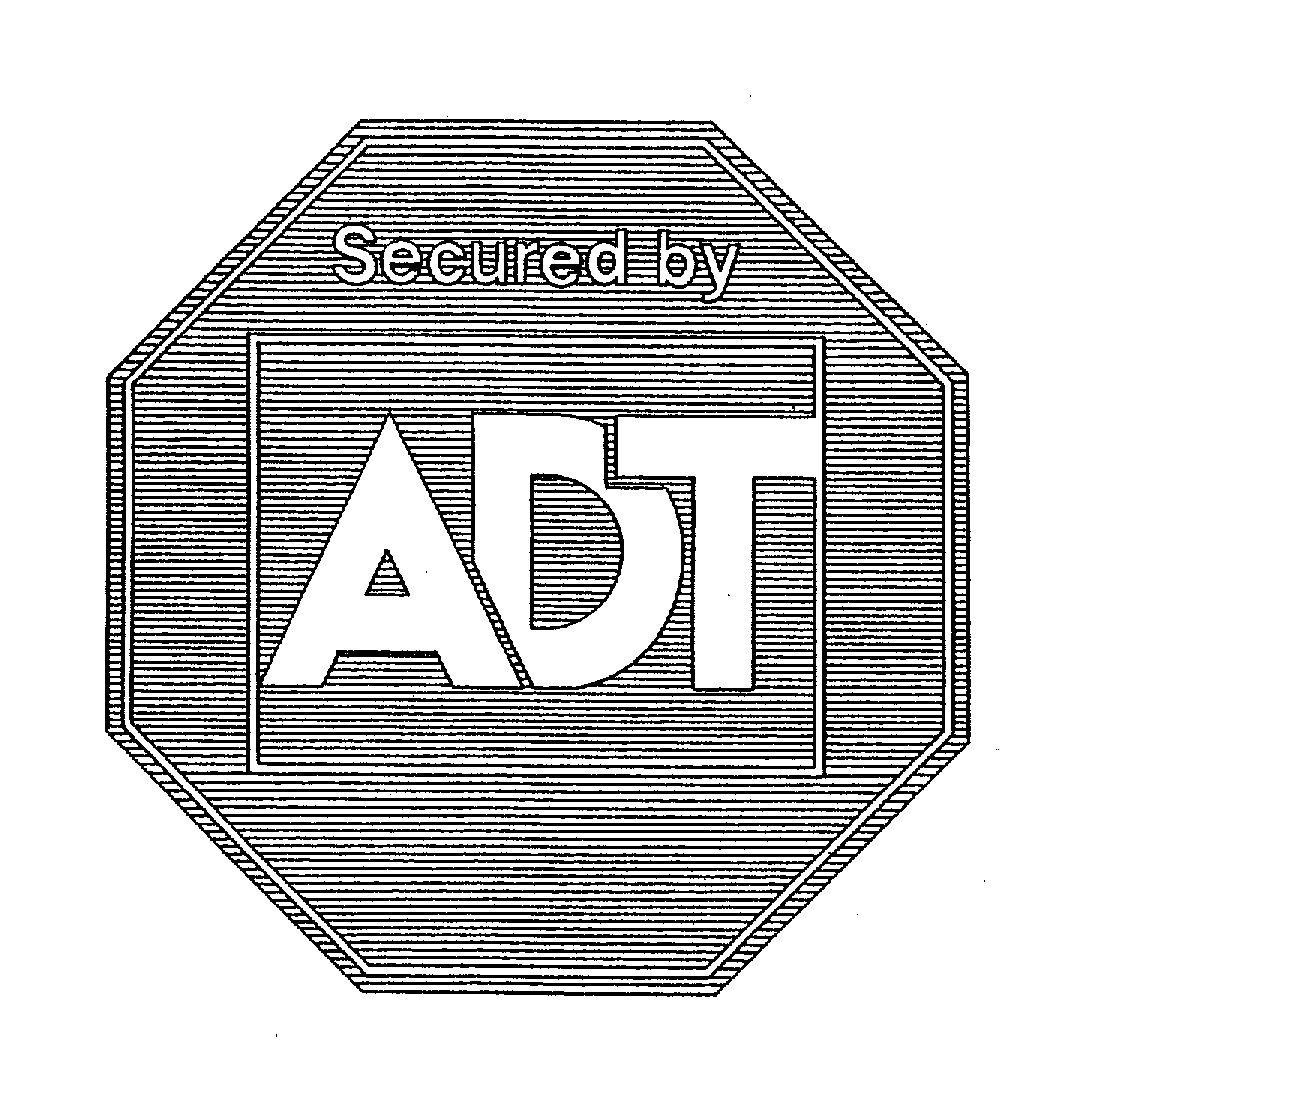  SECURED BY ADT